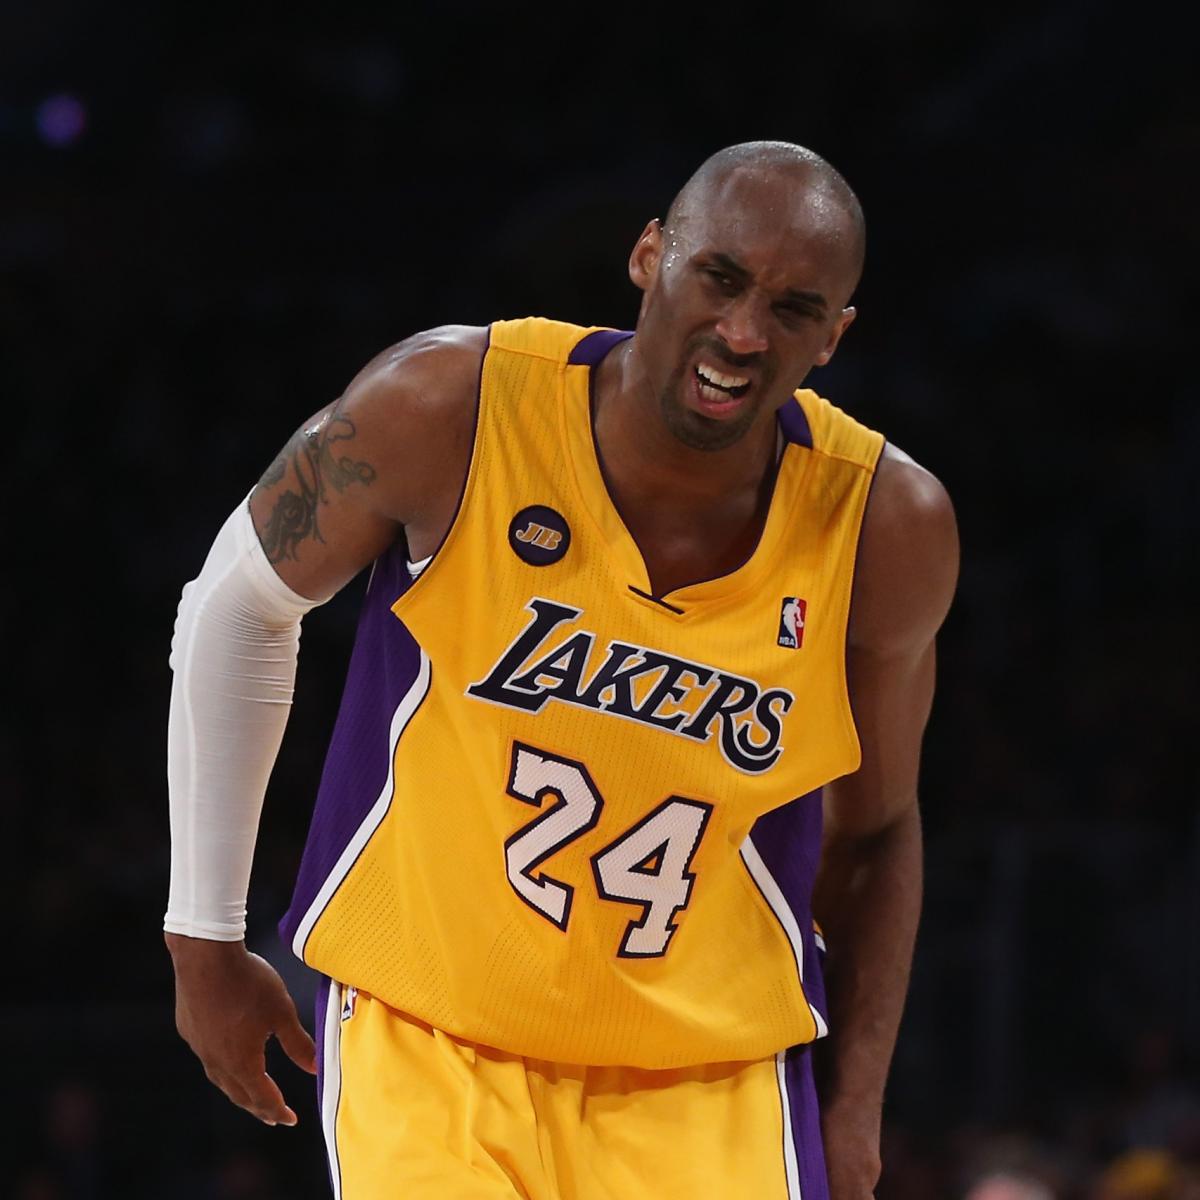 Lakers News: Kobe Bryant's Injury One of the Saddest Scenes in Sports History ...